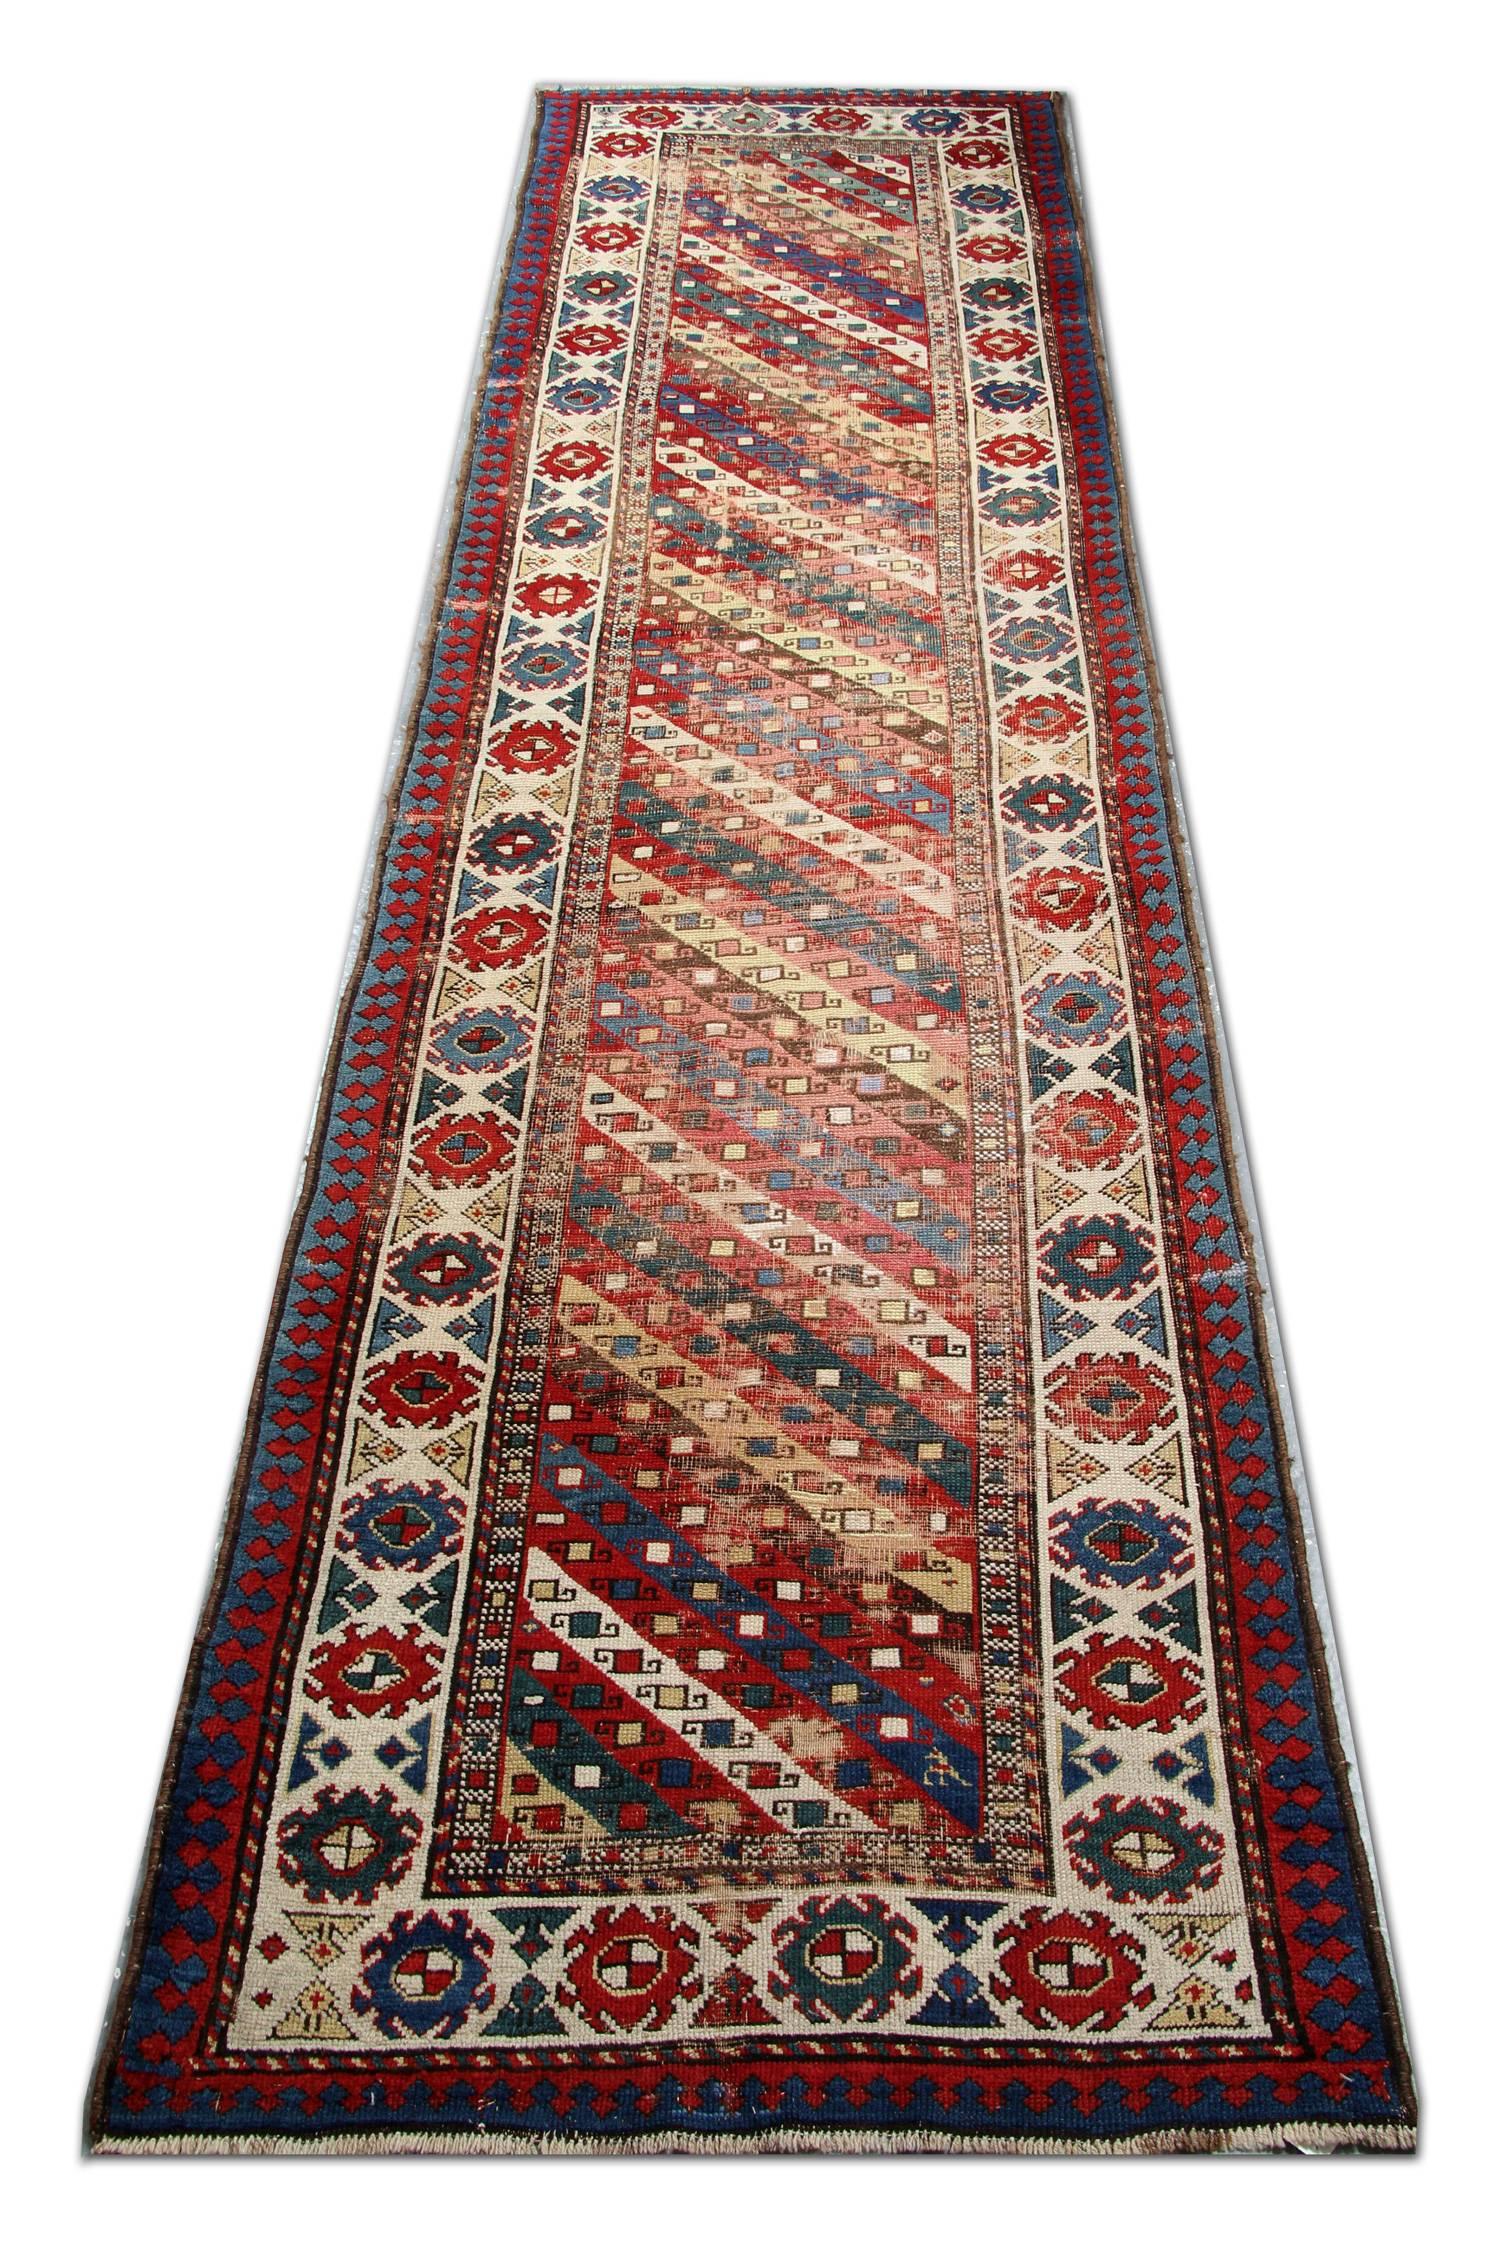 Handmade carpet oriental rug born out of nomadic traditions, this antique striped rug from Ganjeh features a spectacular array of modular stripes and classical border motifs that have a graphic large rugs linear style. The warm, earthy field is